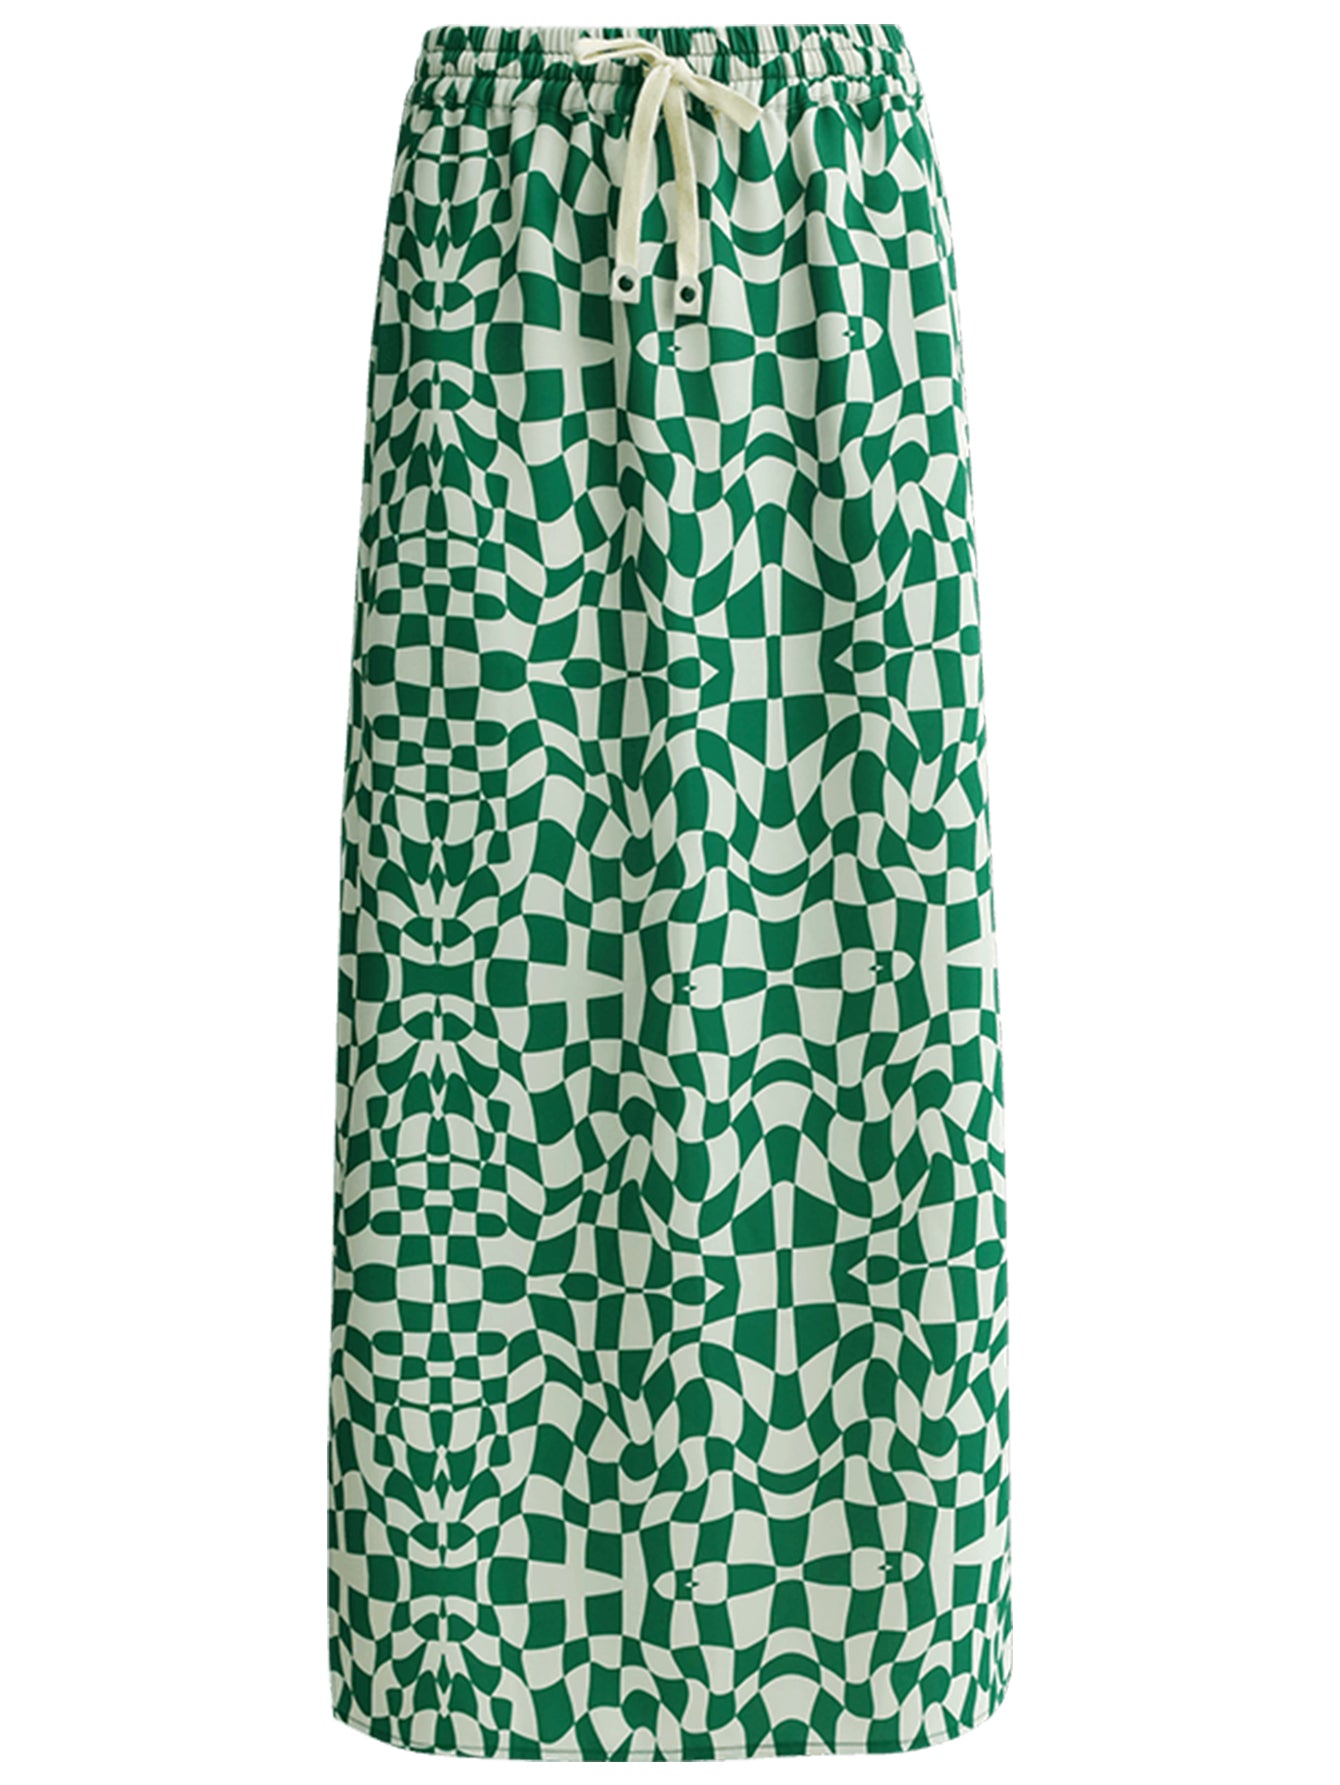 relaxed-fit-checked-skirt-with-side-slit_all_green_4.jpg